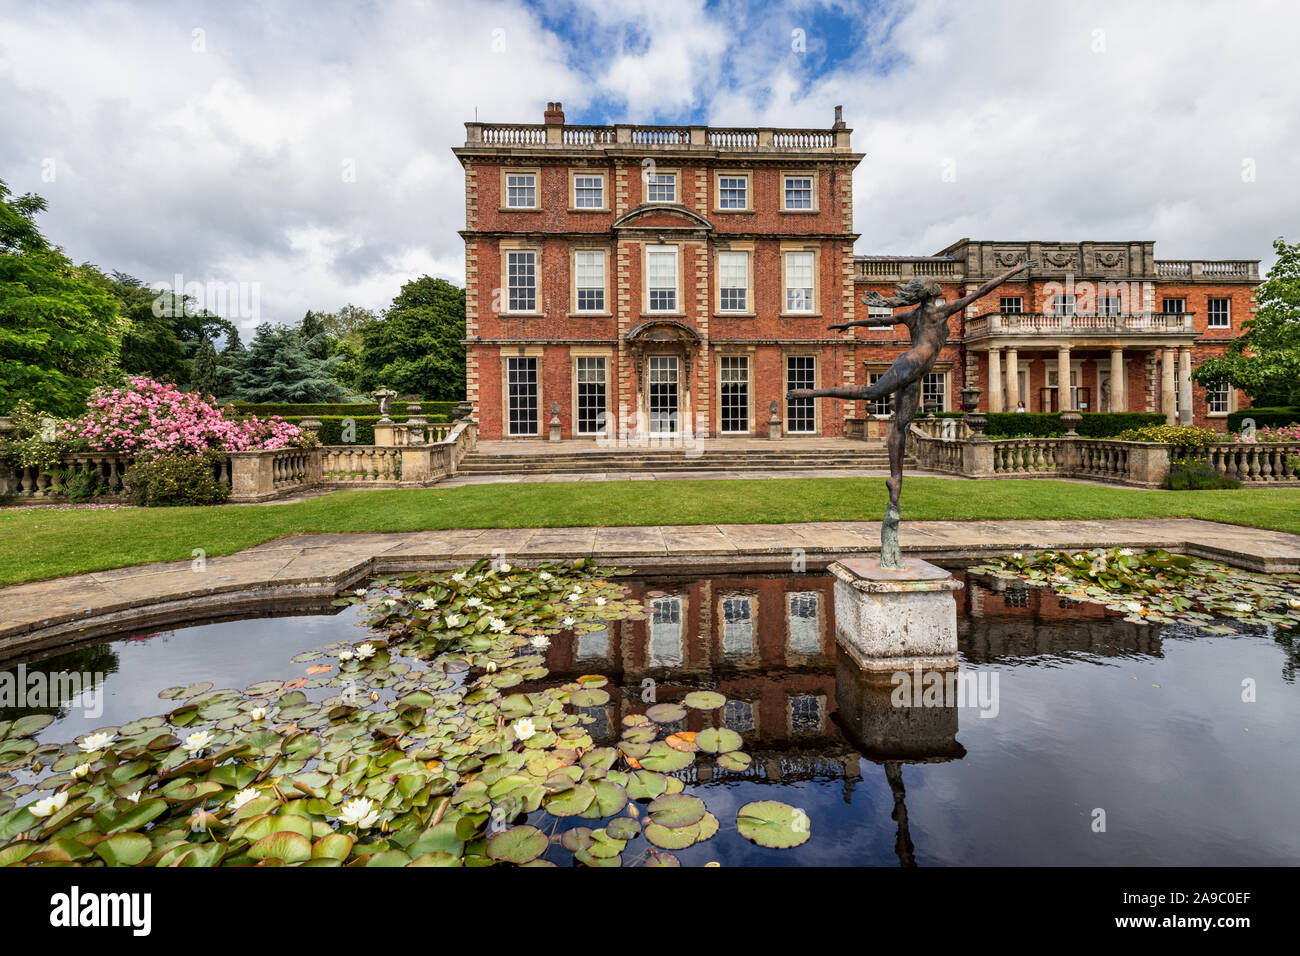 Pool and statue at Newby Hall, an 18th-century country house, situated beside the River Ure at Skelton-on-Ure, near Ripon in North Yorkshire, England. Stock Photo